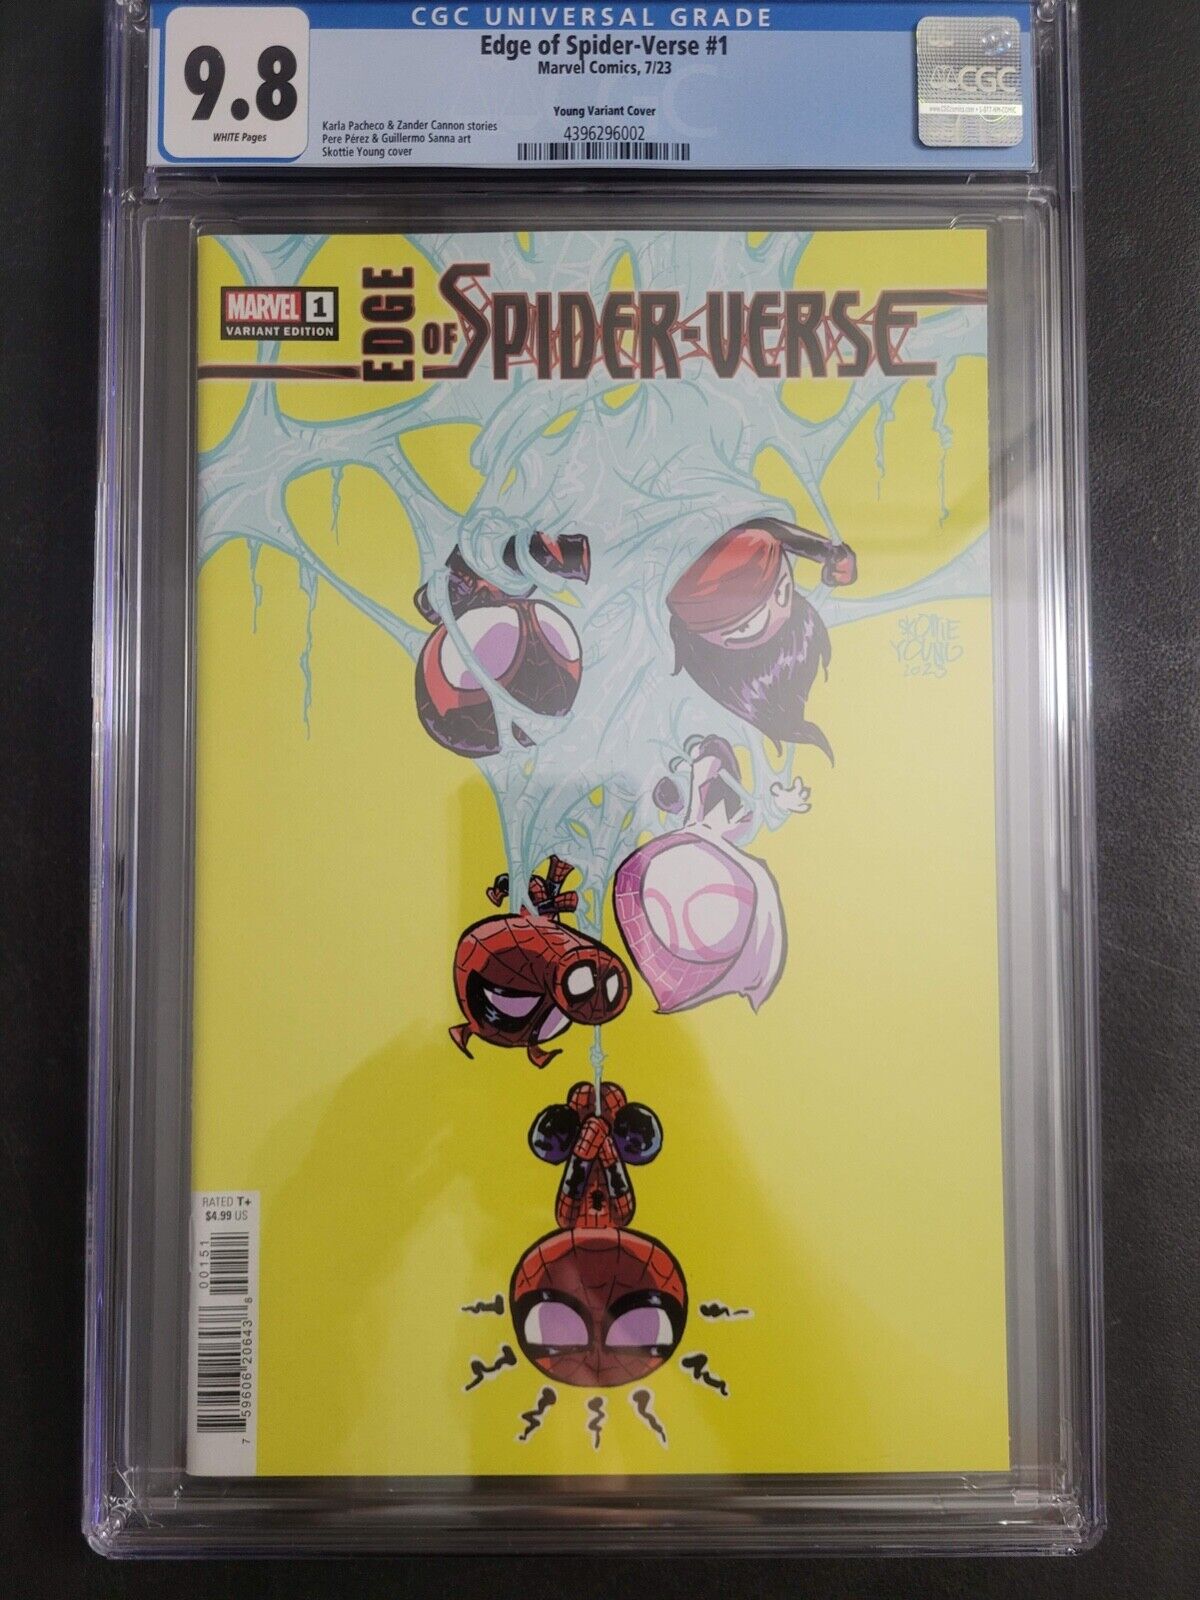 EDGE OF SPIDER-VERSE #1 CGC 9.8 GRADED 2023 SKOTTIE YOUNG VARIANT COVER